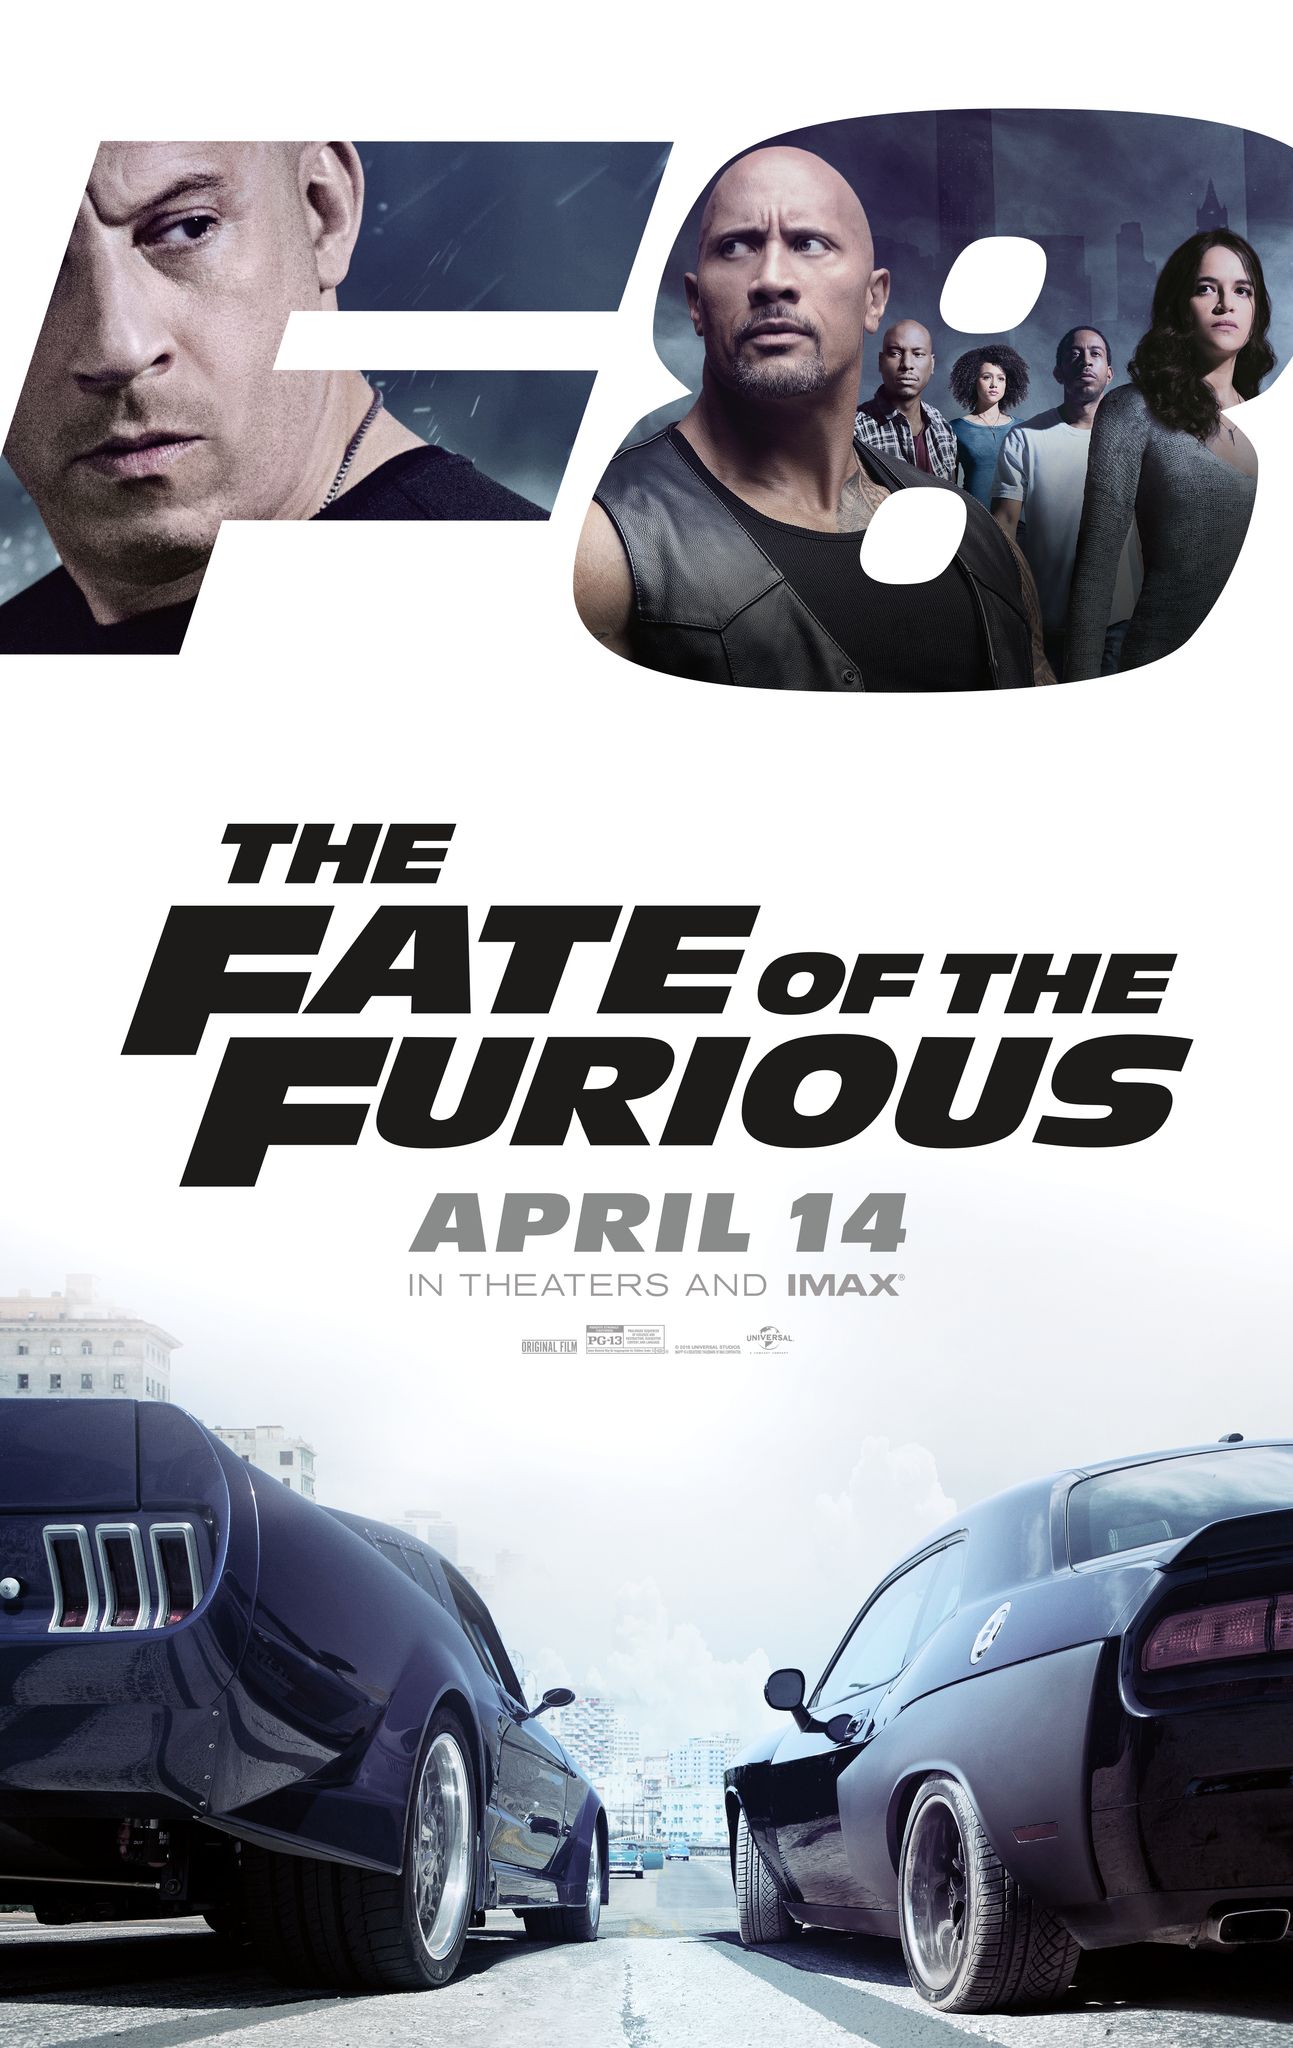 The Fate of the Furious (2017) Hindi Dubbed Full Movie